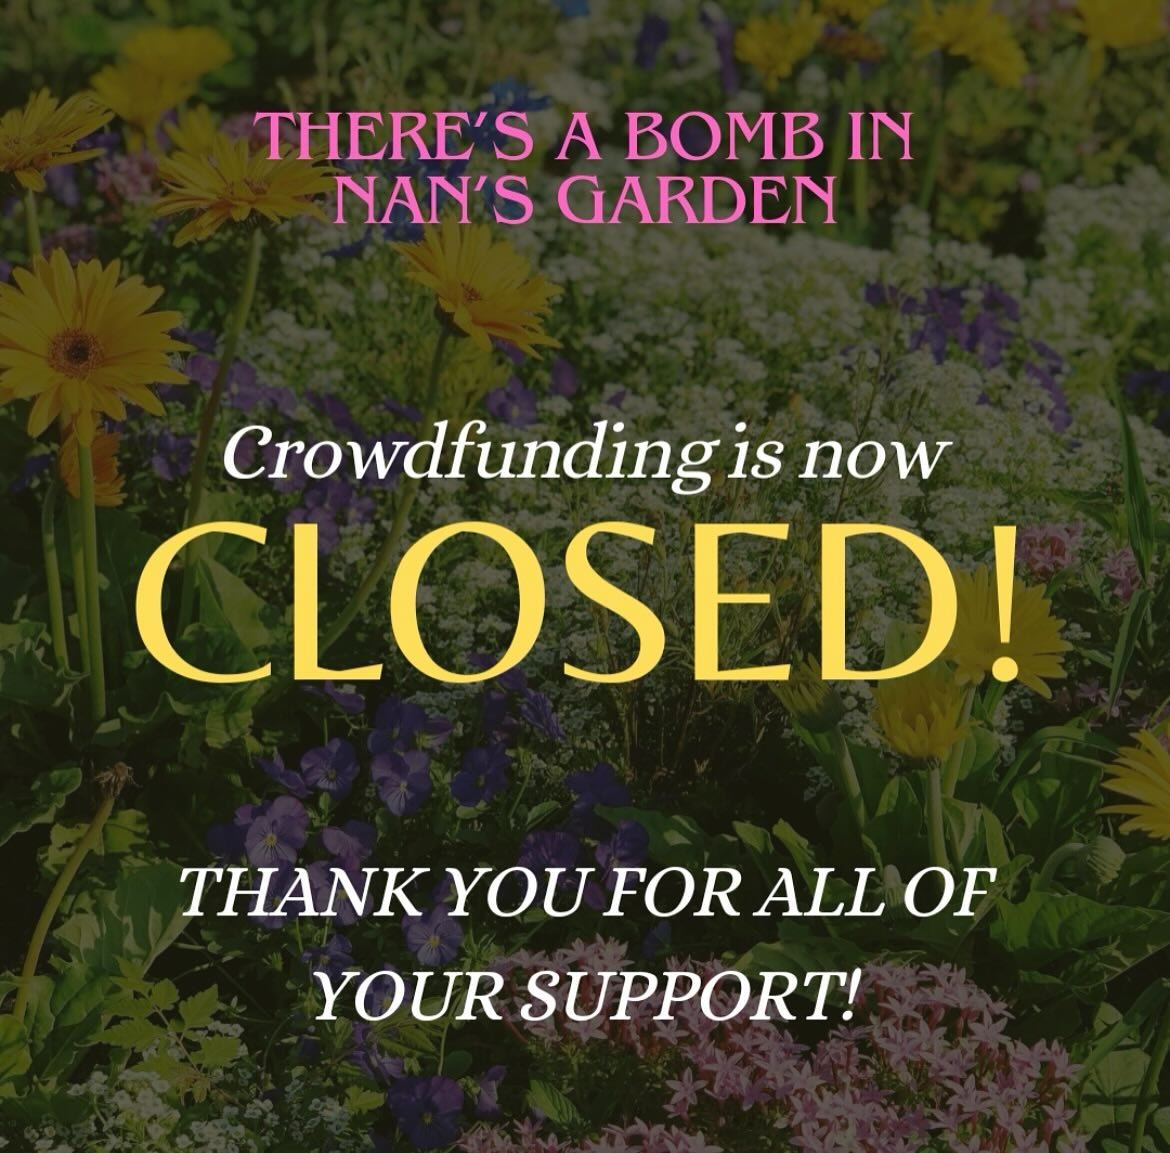 That&rsquo;s right! Crowdfunding for There&rsquo;s A Bomb in Nan&rsquo;s Garden is now CLOSED!

Thank you to each and every one of you for donating to the campaign. Your generosity and support has kickstarted our first production into action! We are 